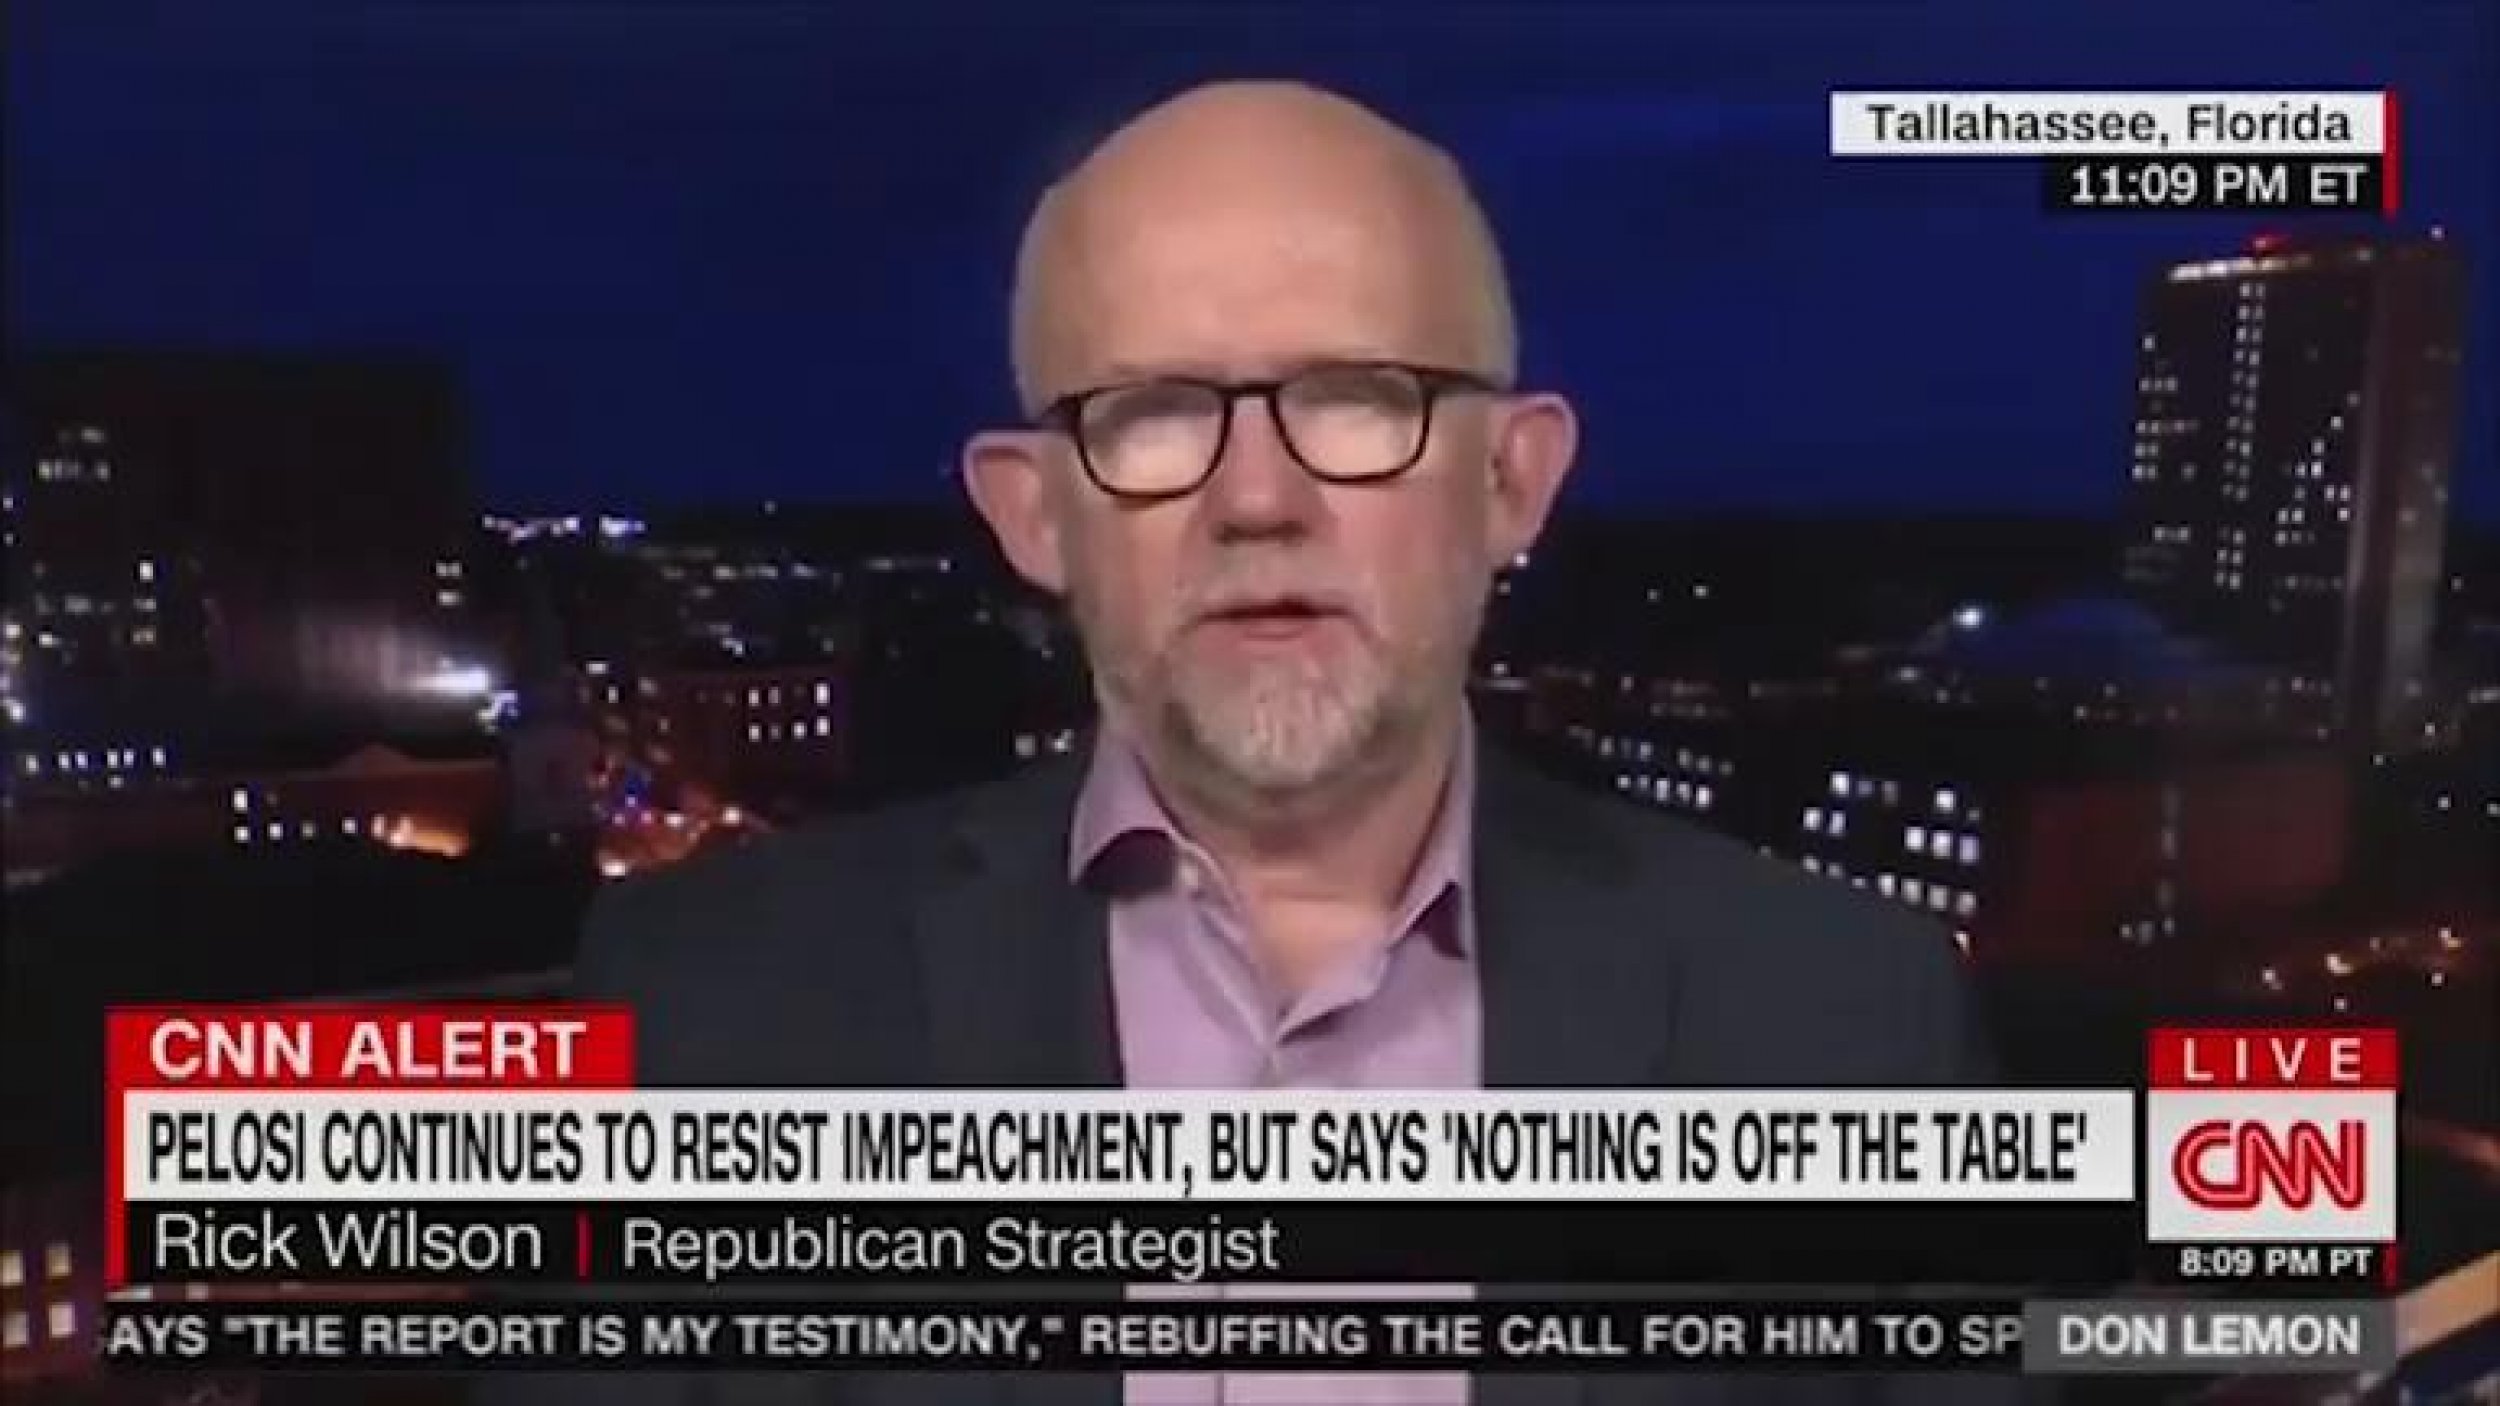 GOP CNN Guest Warns Nancy Pelosi On Impeachment If Youre Going After The King, You Best Get Him